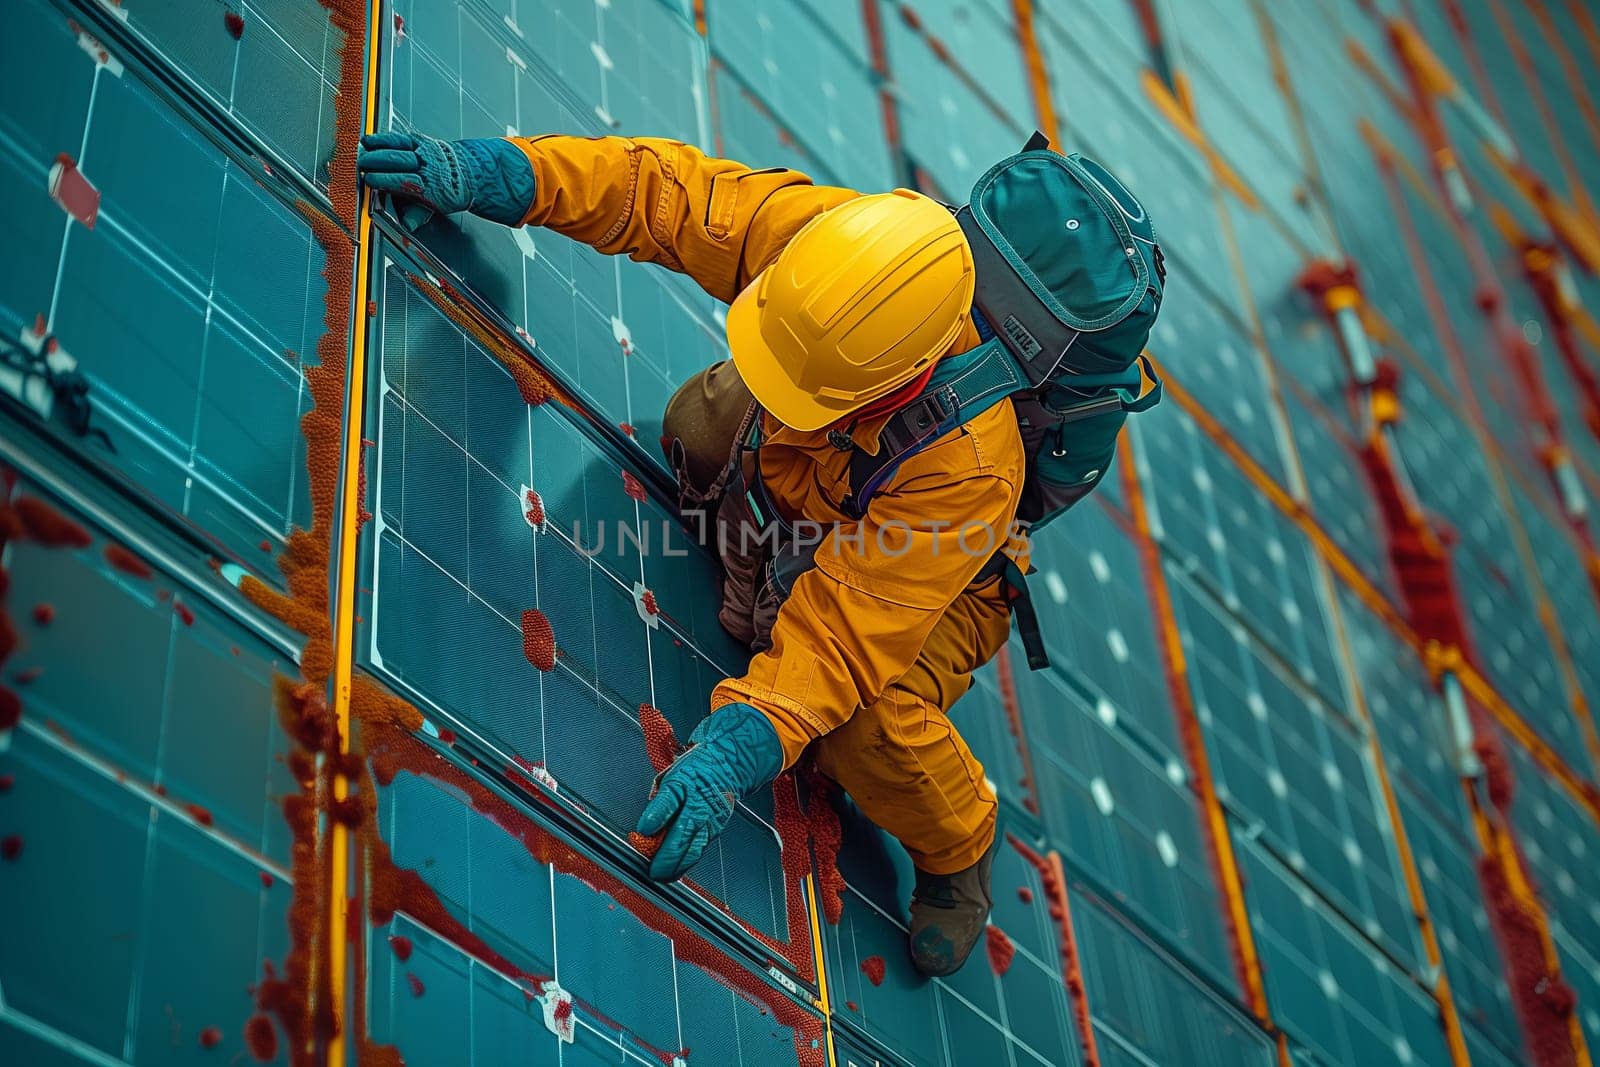 A bluecollar worker is scaling a wall of solar panels for recreation using a rope and helmet. The adventure involves composite materials and electric blue panels